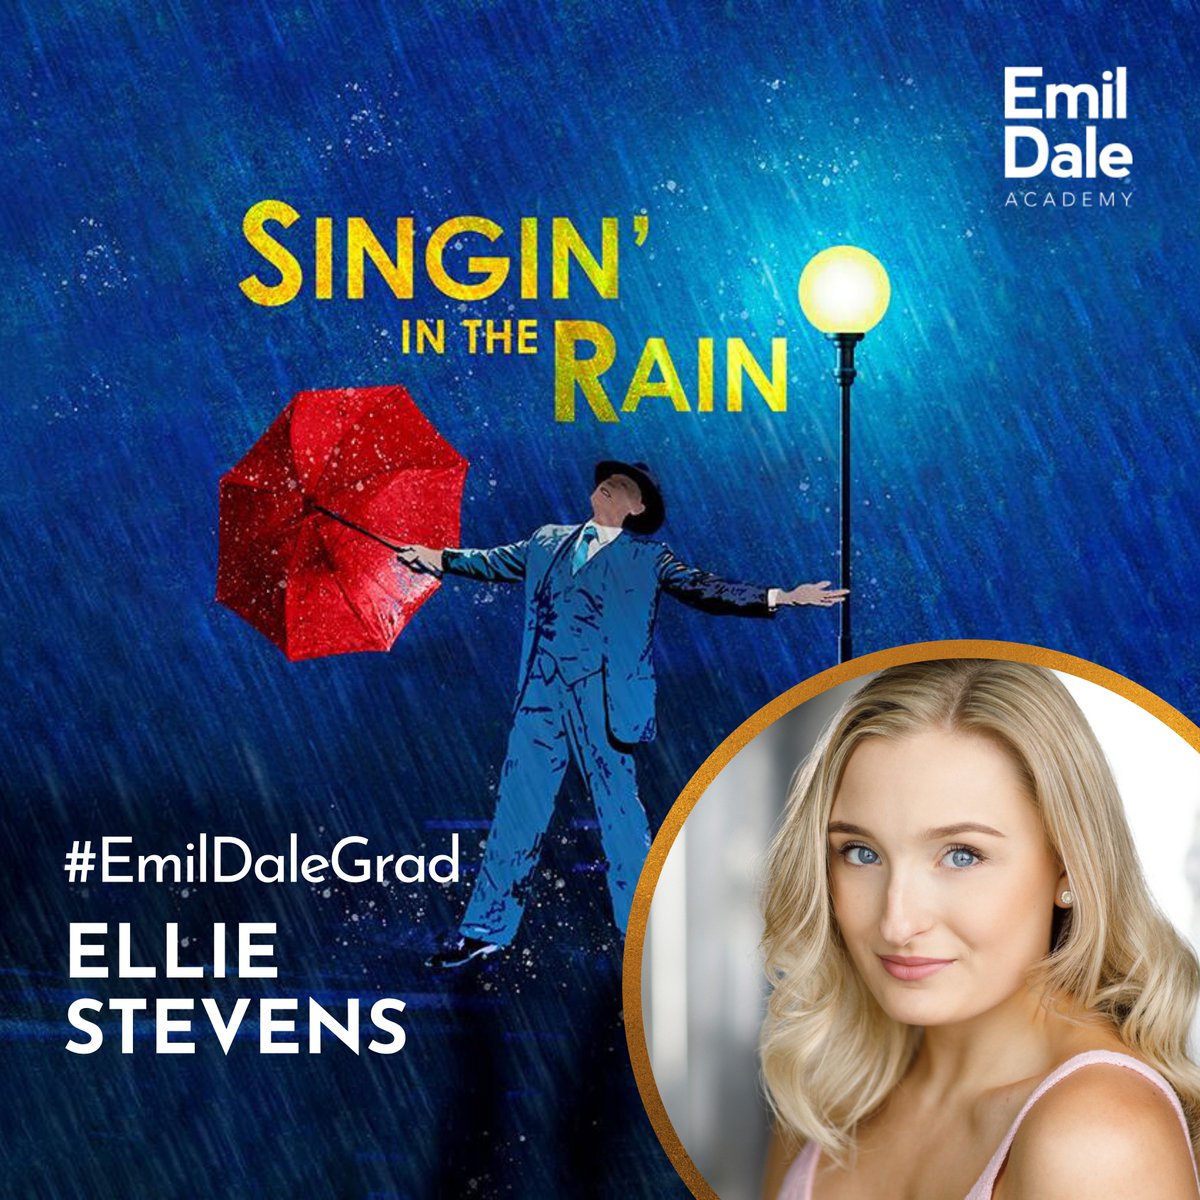 ✨ MORE GRAD NEWS! ✨ Huge congratulations to Emil Dale graduate Ellie Stevens who has been cast in Singin' In The Rain at Kilworth House this Summer! 💫 We were already proud of you ⭐️ #EmilDaleGrad #theatre #emildale #sing #dance #KilworthHouse #musicaltheatre